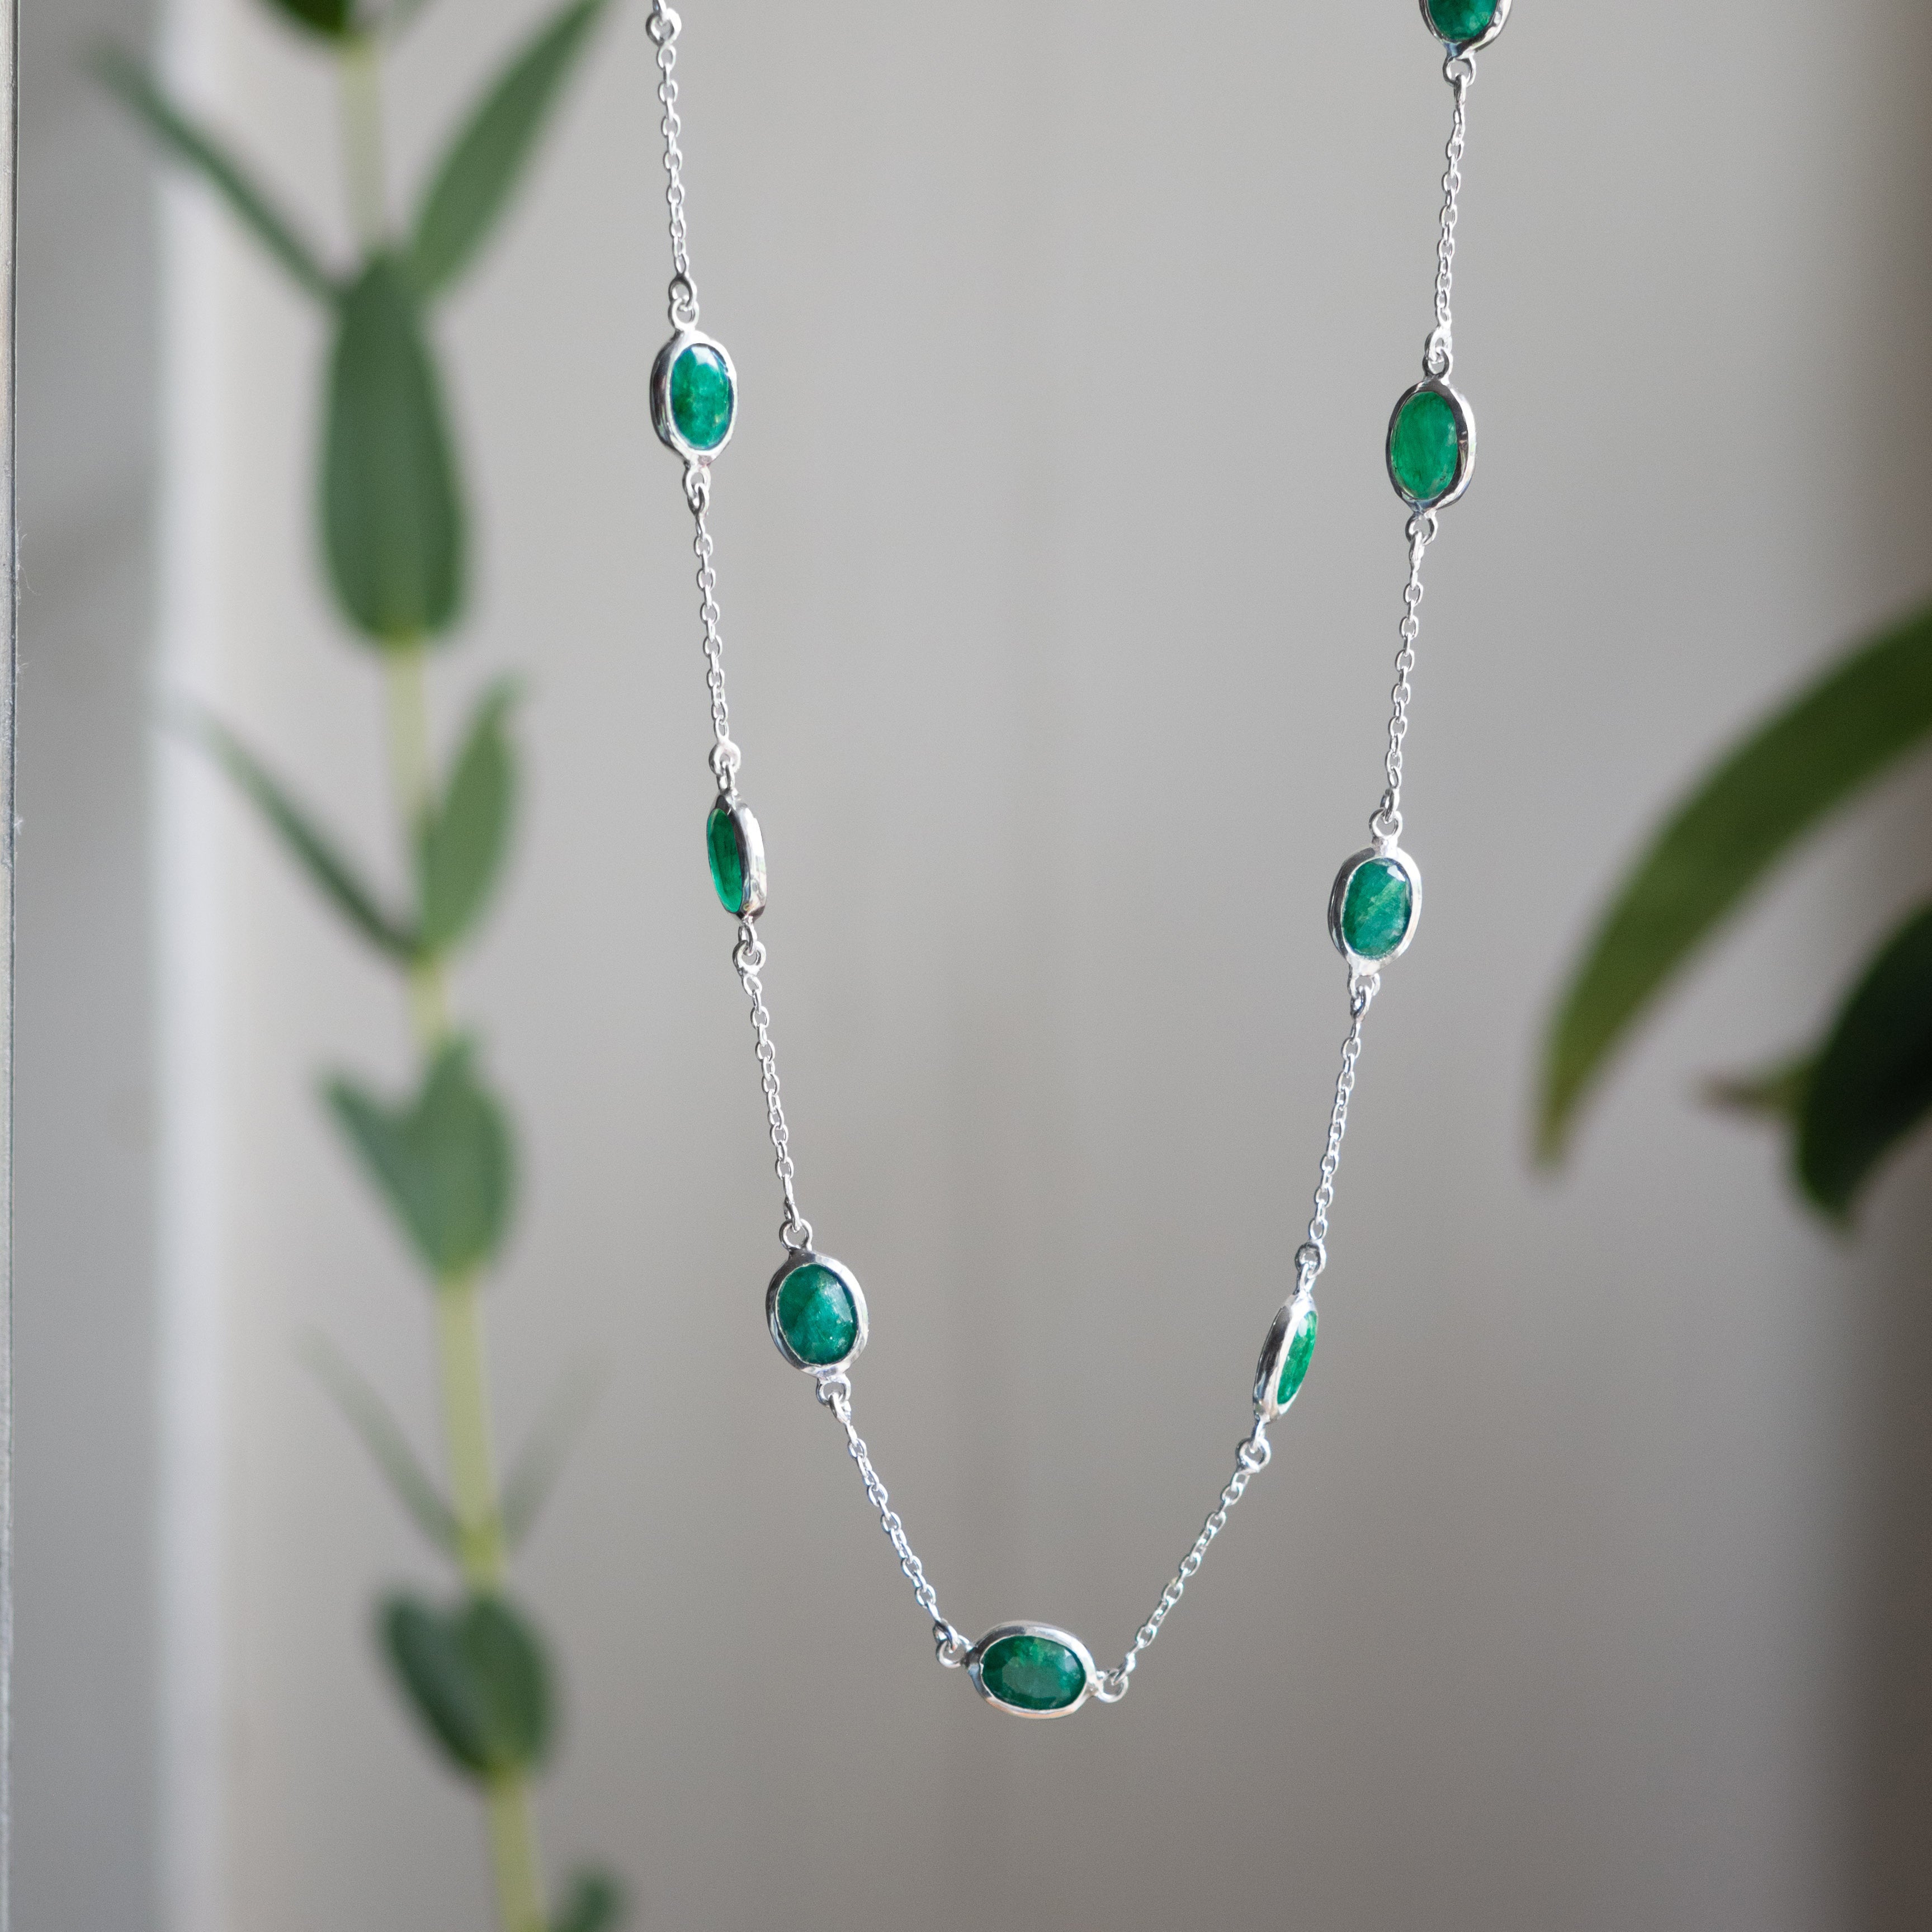 marilyn silver necklace with emerald quartz from memara